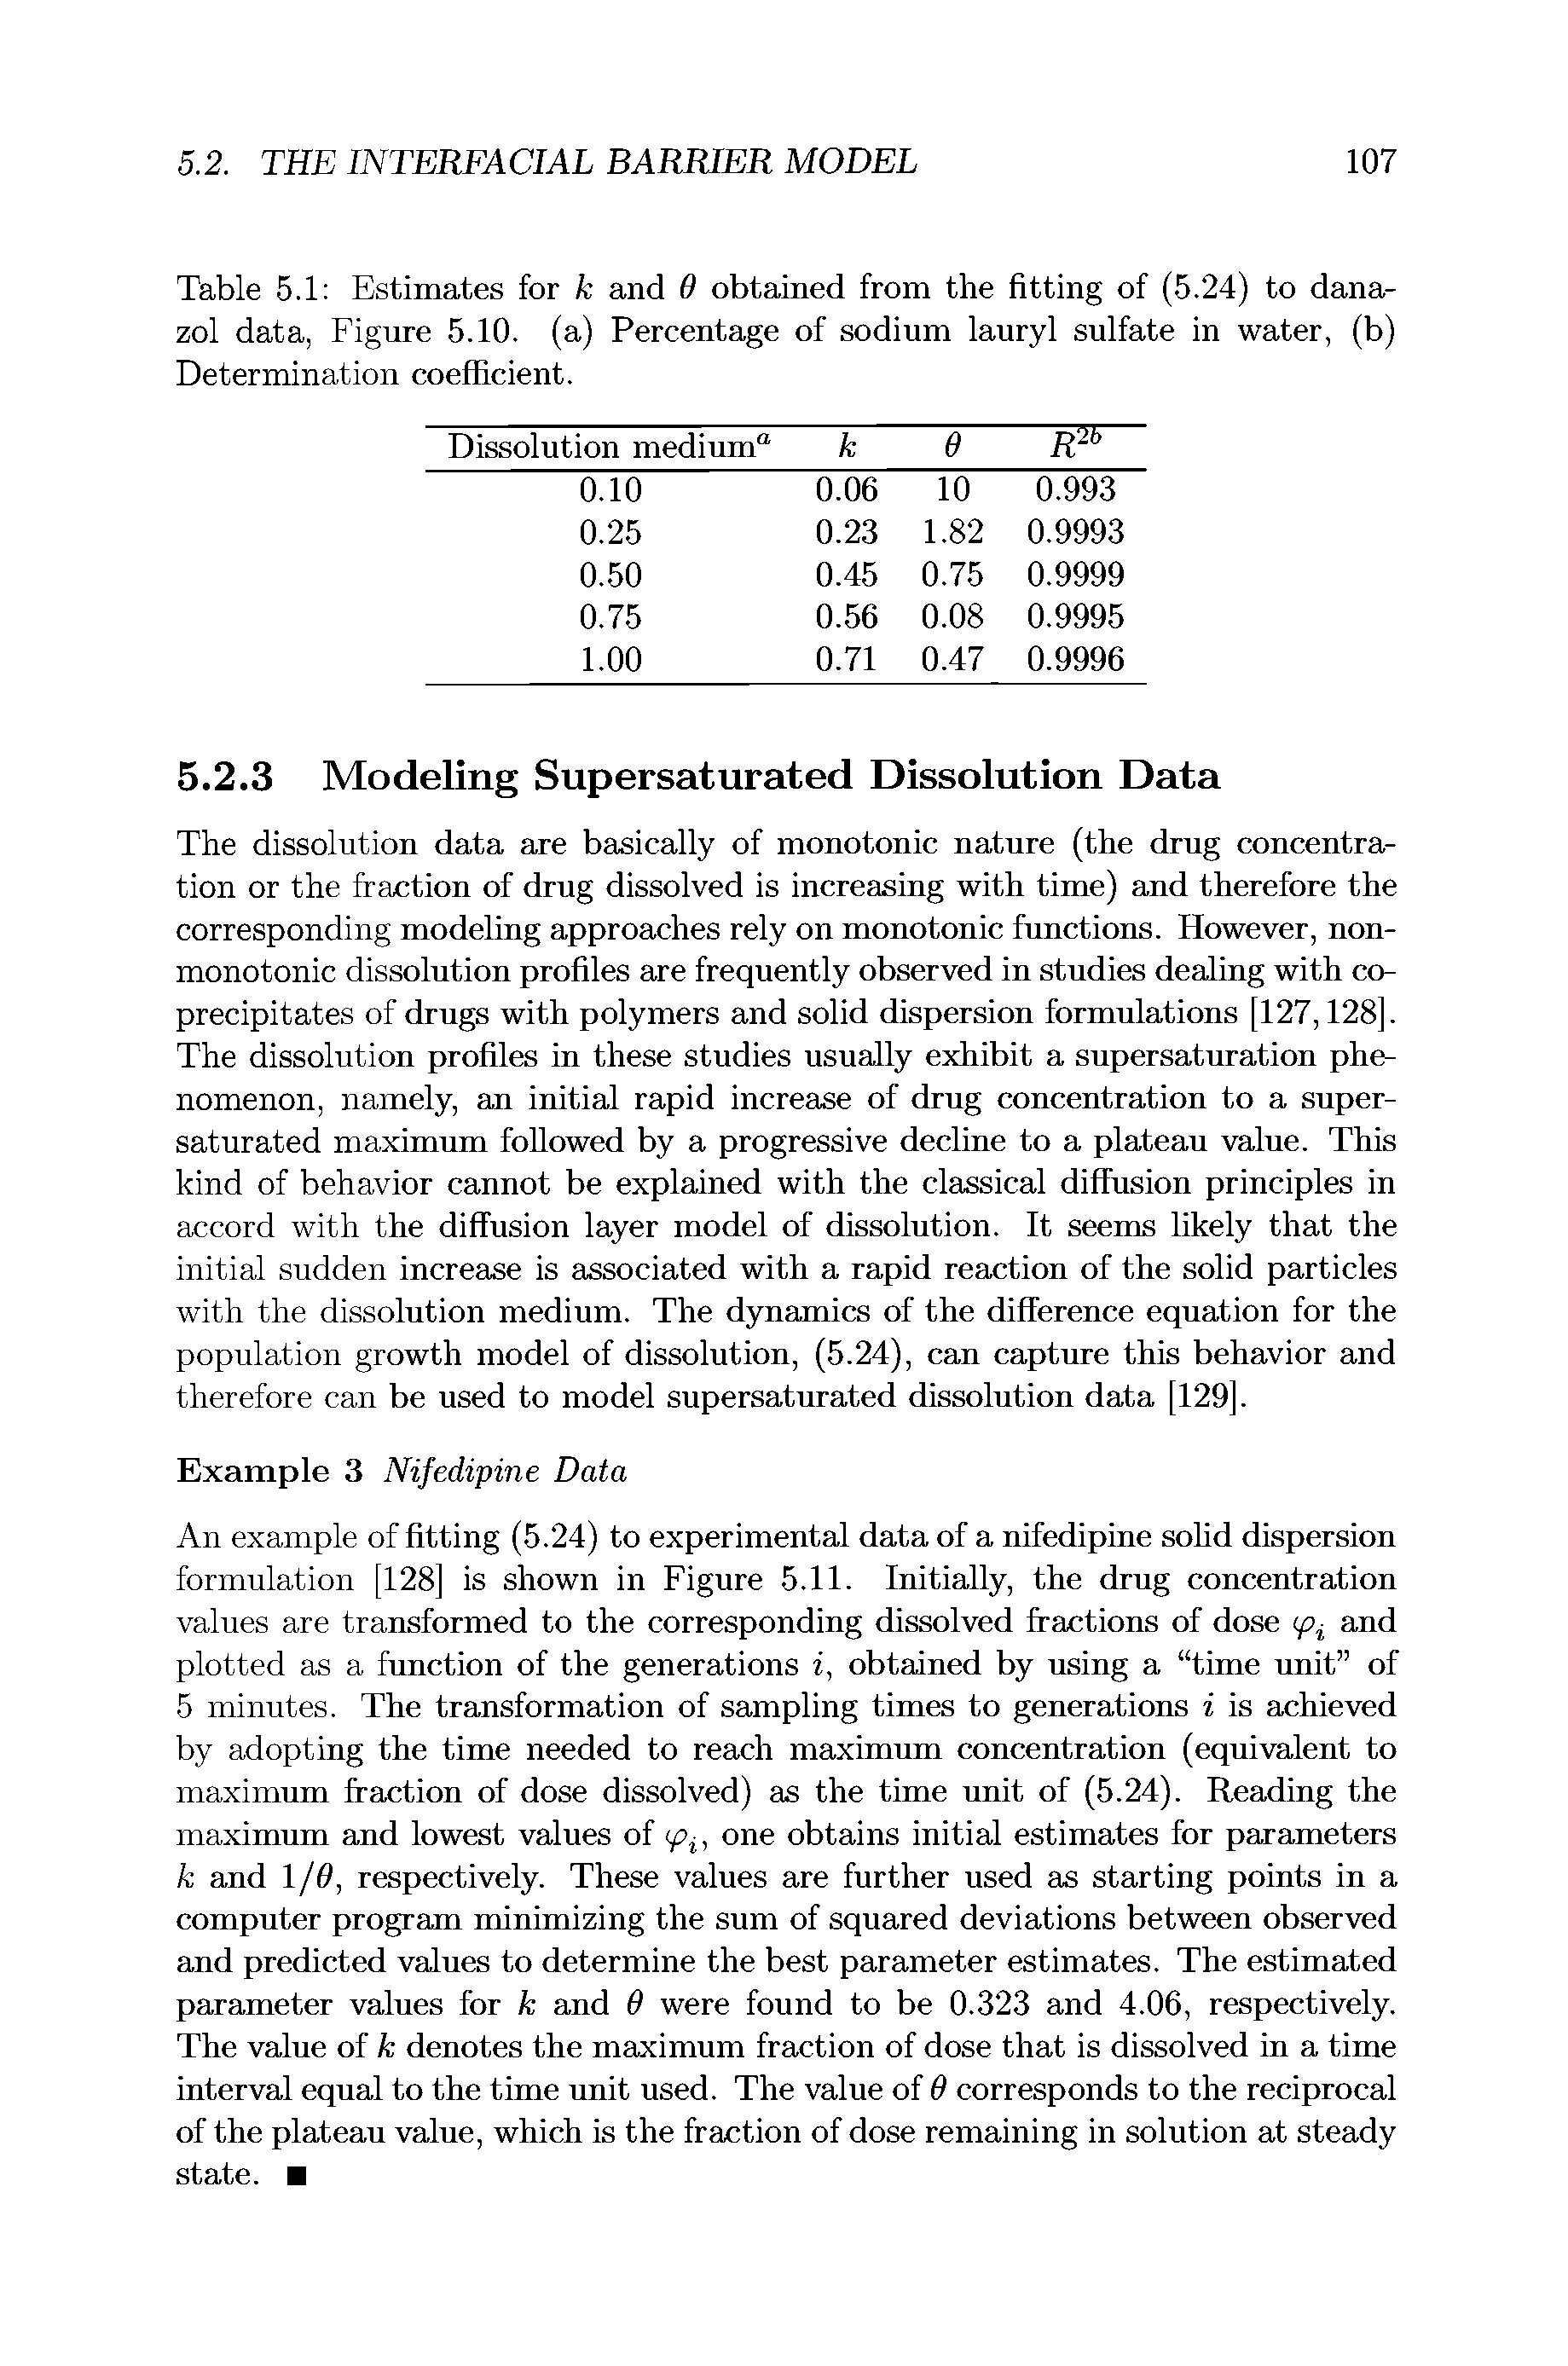 Table 5.1 Estimates for k and 6 obtained from the fitting of (5.24) to dana-zol data, Figure 5.10. (a) Percentage of sodium lauryl sulfate in water, (b) Determination coefficient.